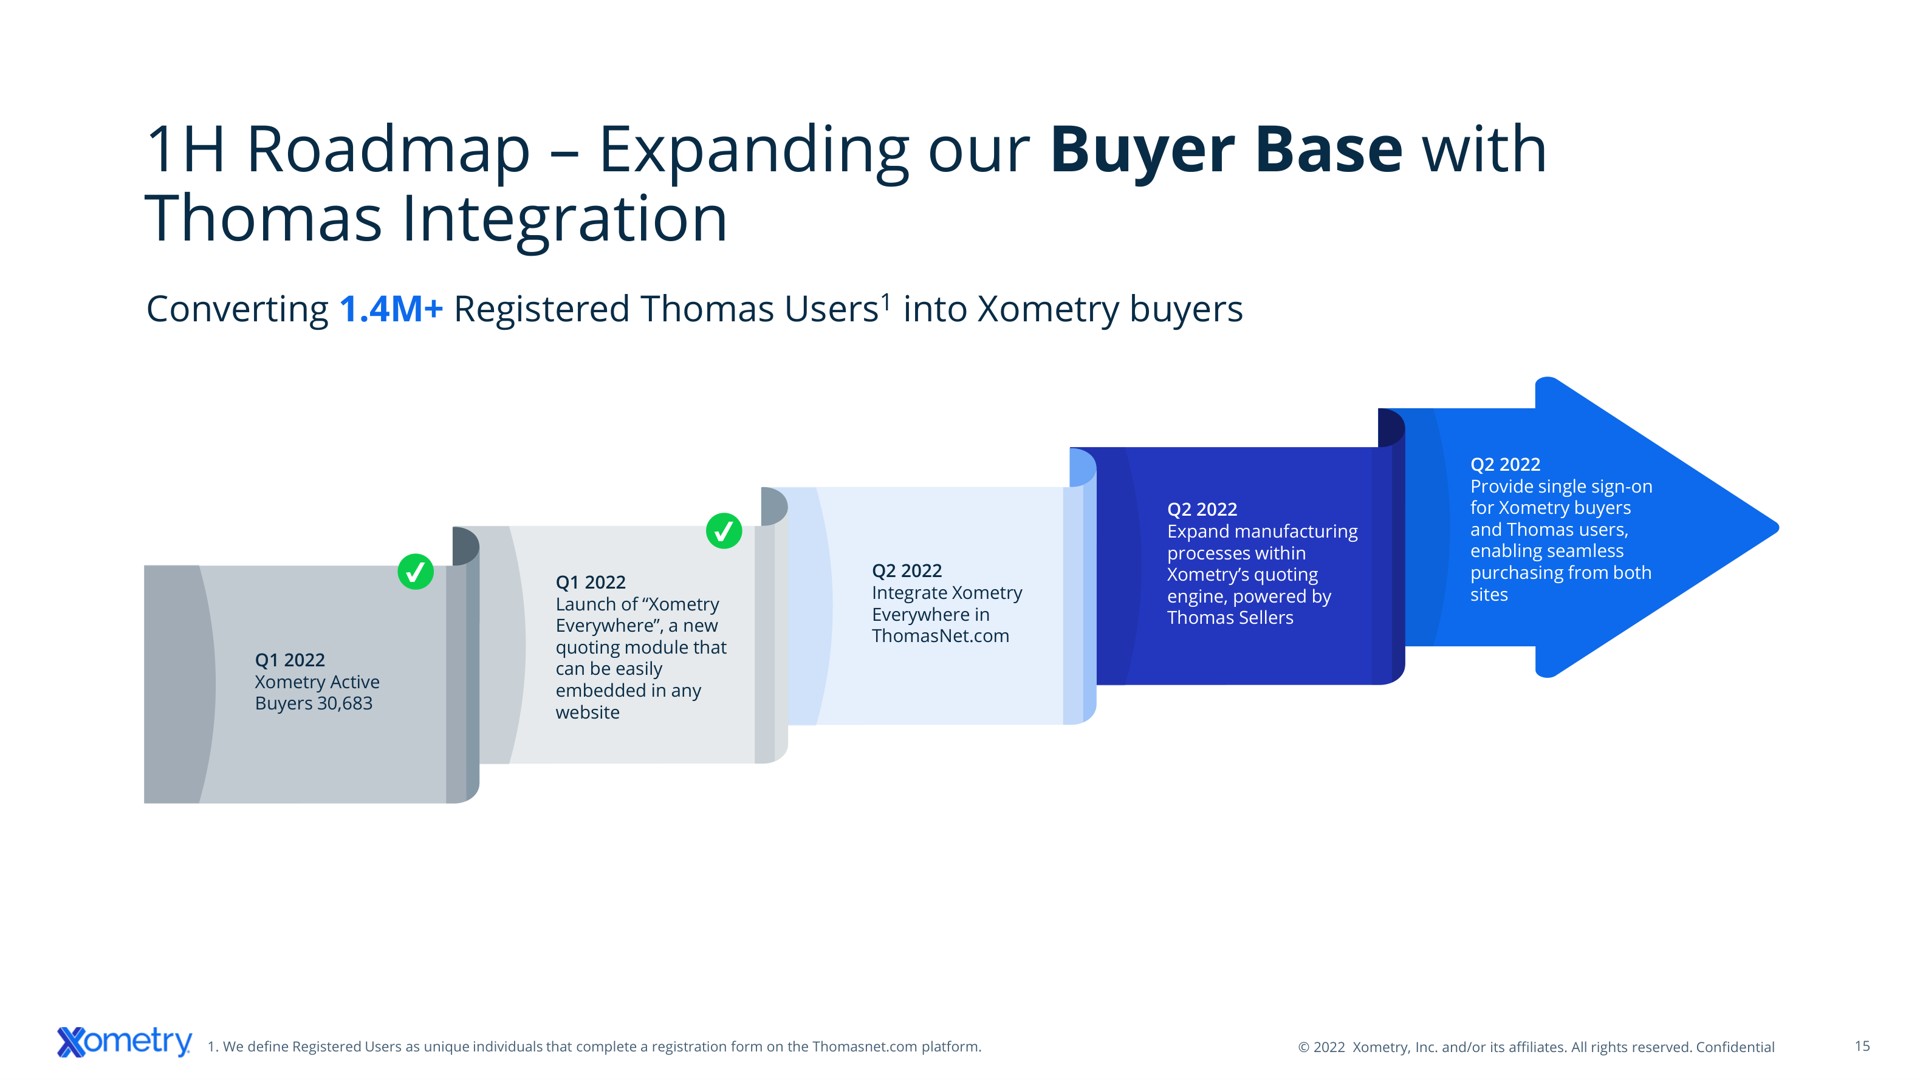 expanding our buyer base with integration | Xometry